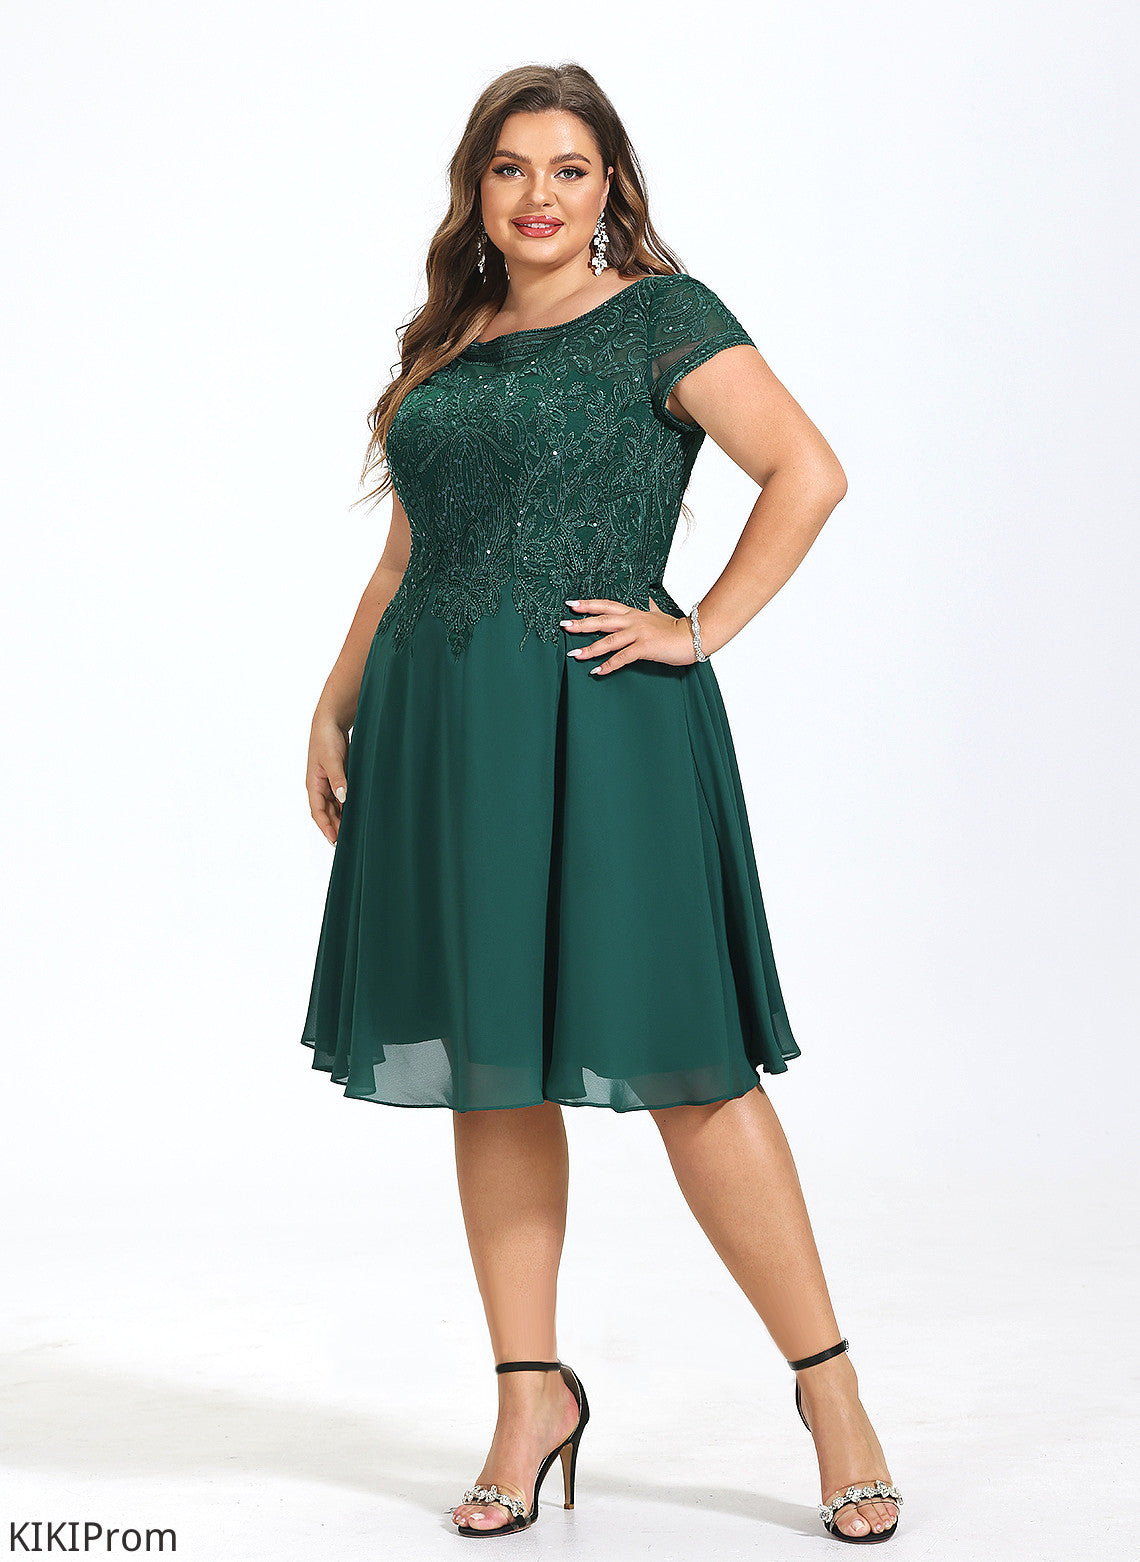 Cocktail Dresses Neck Scoop Trudie Lace Dress Knee-Length Sequins A-Line Chiffon With Cocktail